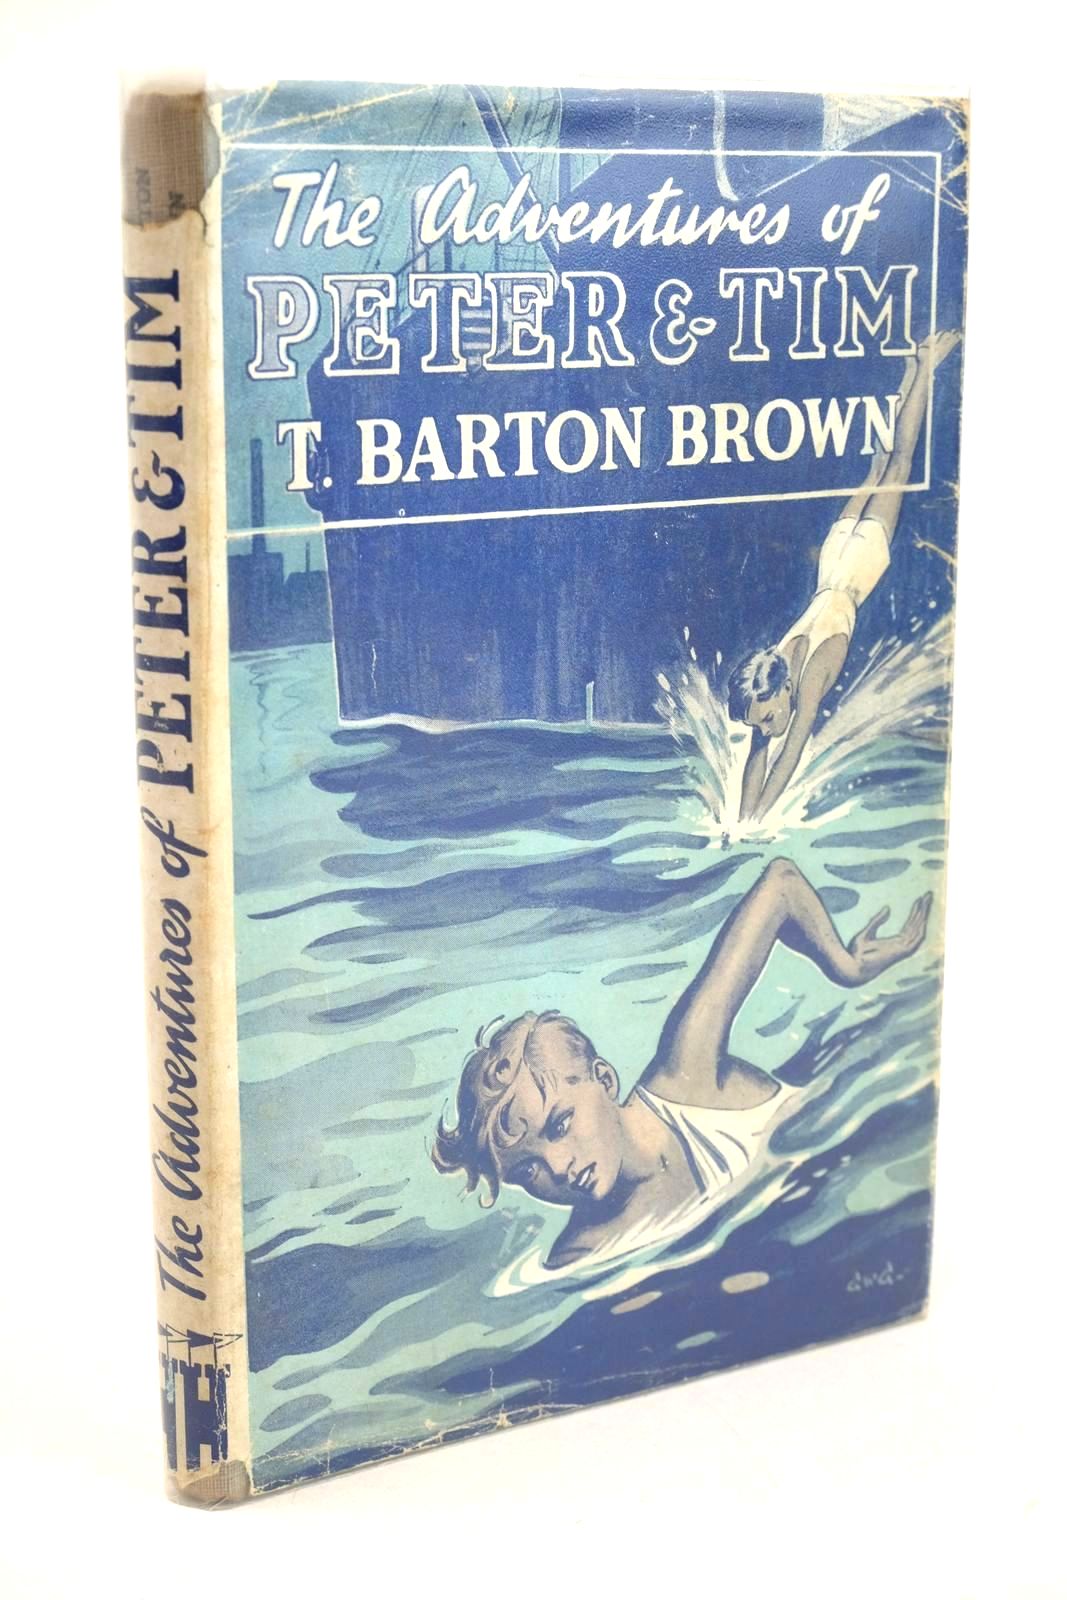 Photo of THE ADVENTURES OF PETER &AMP; TIM written by Brown, T. Barton illustrated by Goss, G.W. published by Hammond, Hammond &amp; Company Ltd. (STOCK CODE: 1328008)  for sale by Stella & Rose's Books